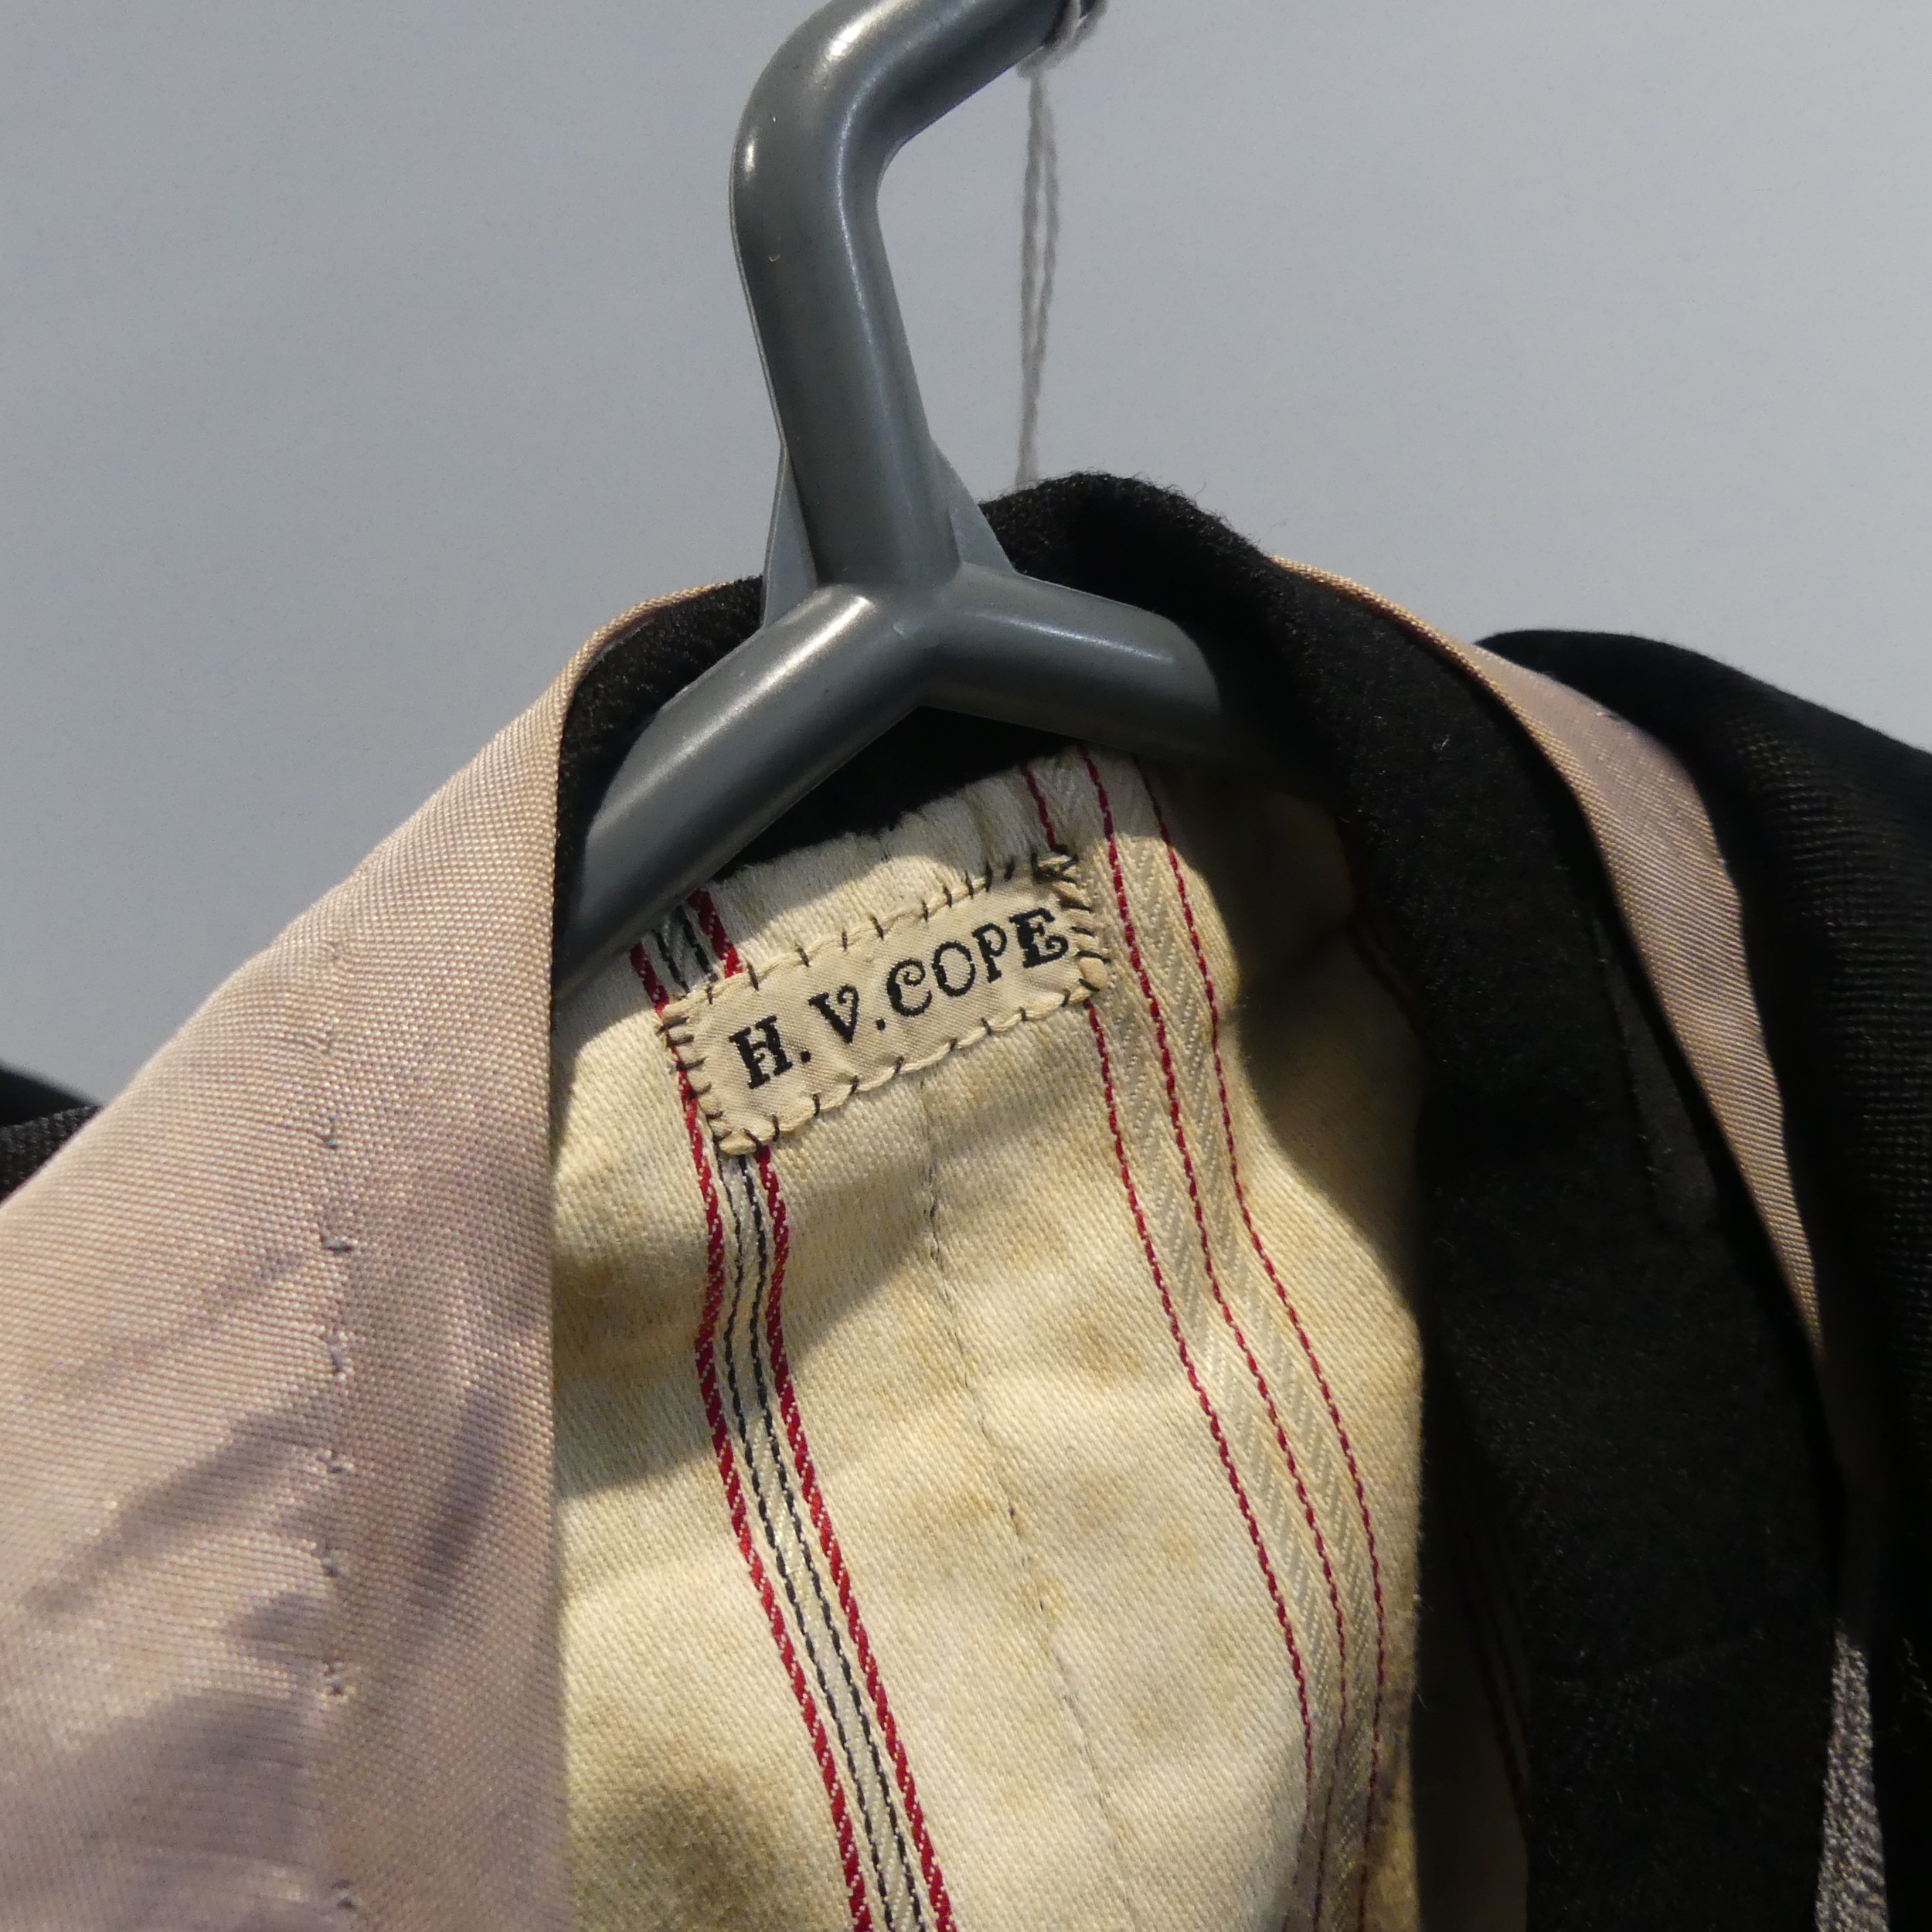 Bespoke Tailoring: early and mid 20th century Men's formal Evening Dress, including three tailcoats, - Image 3 of 6